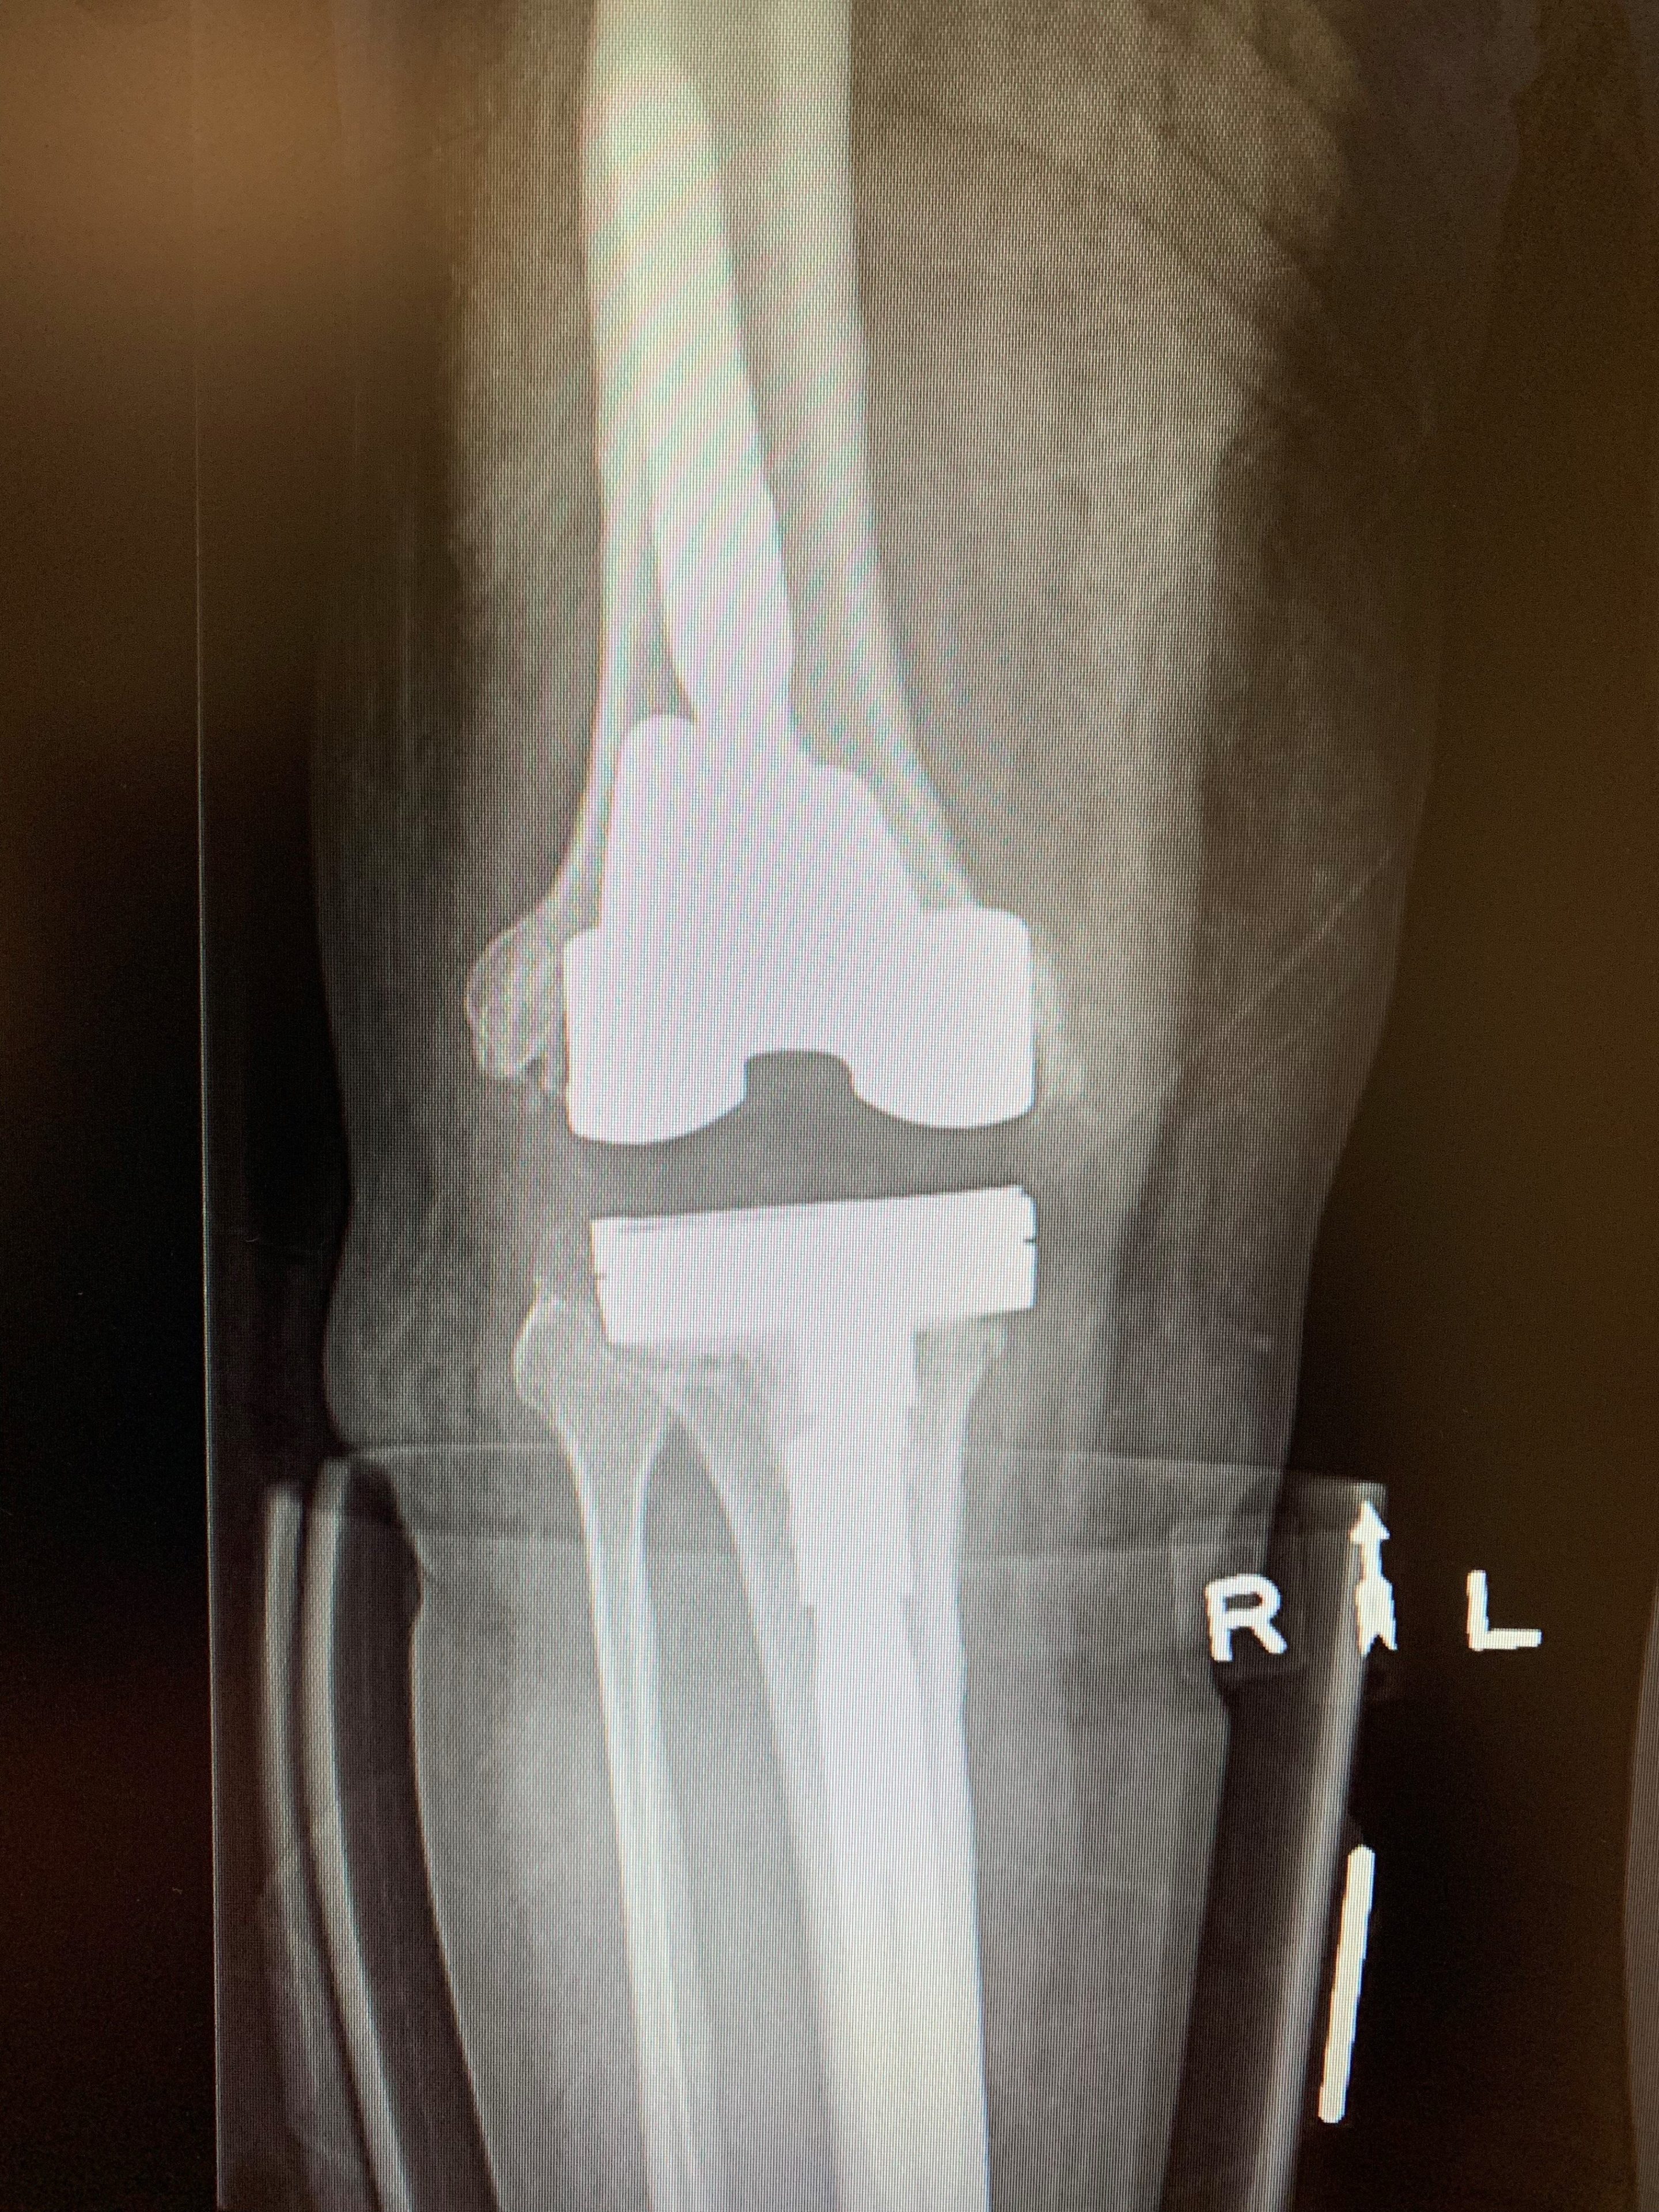 Treatment of infected knee replacement. A staged reconstruction in a 64 year old malea